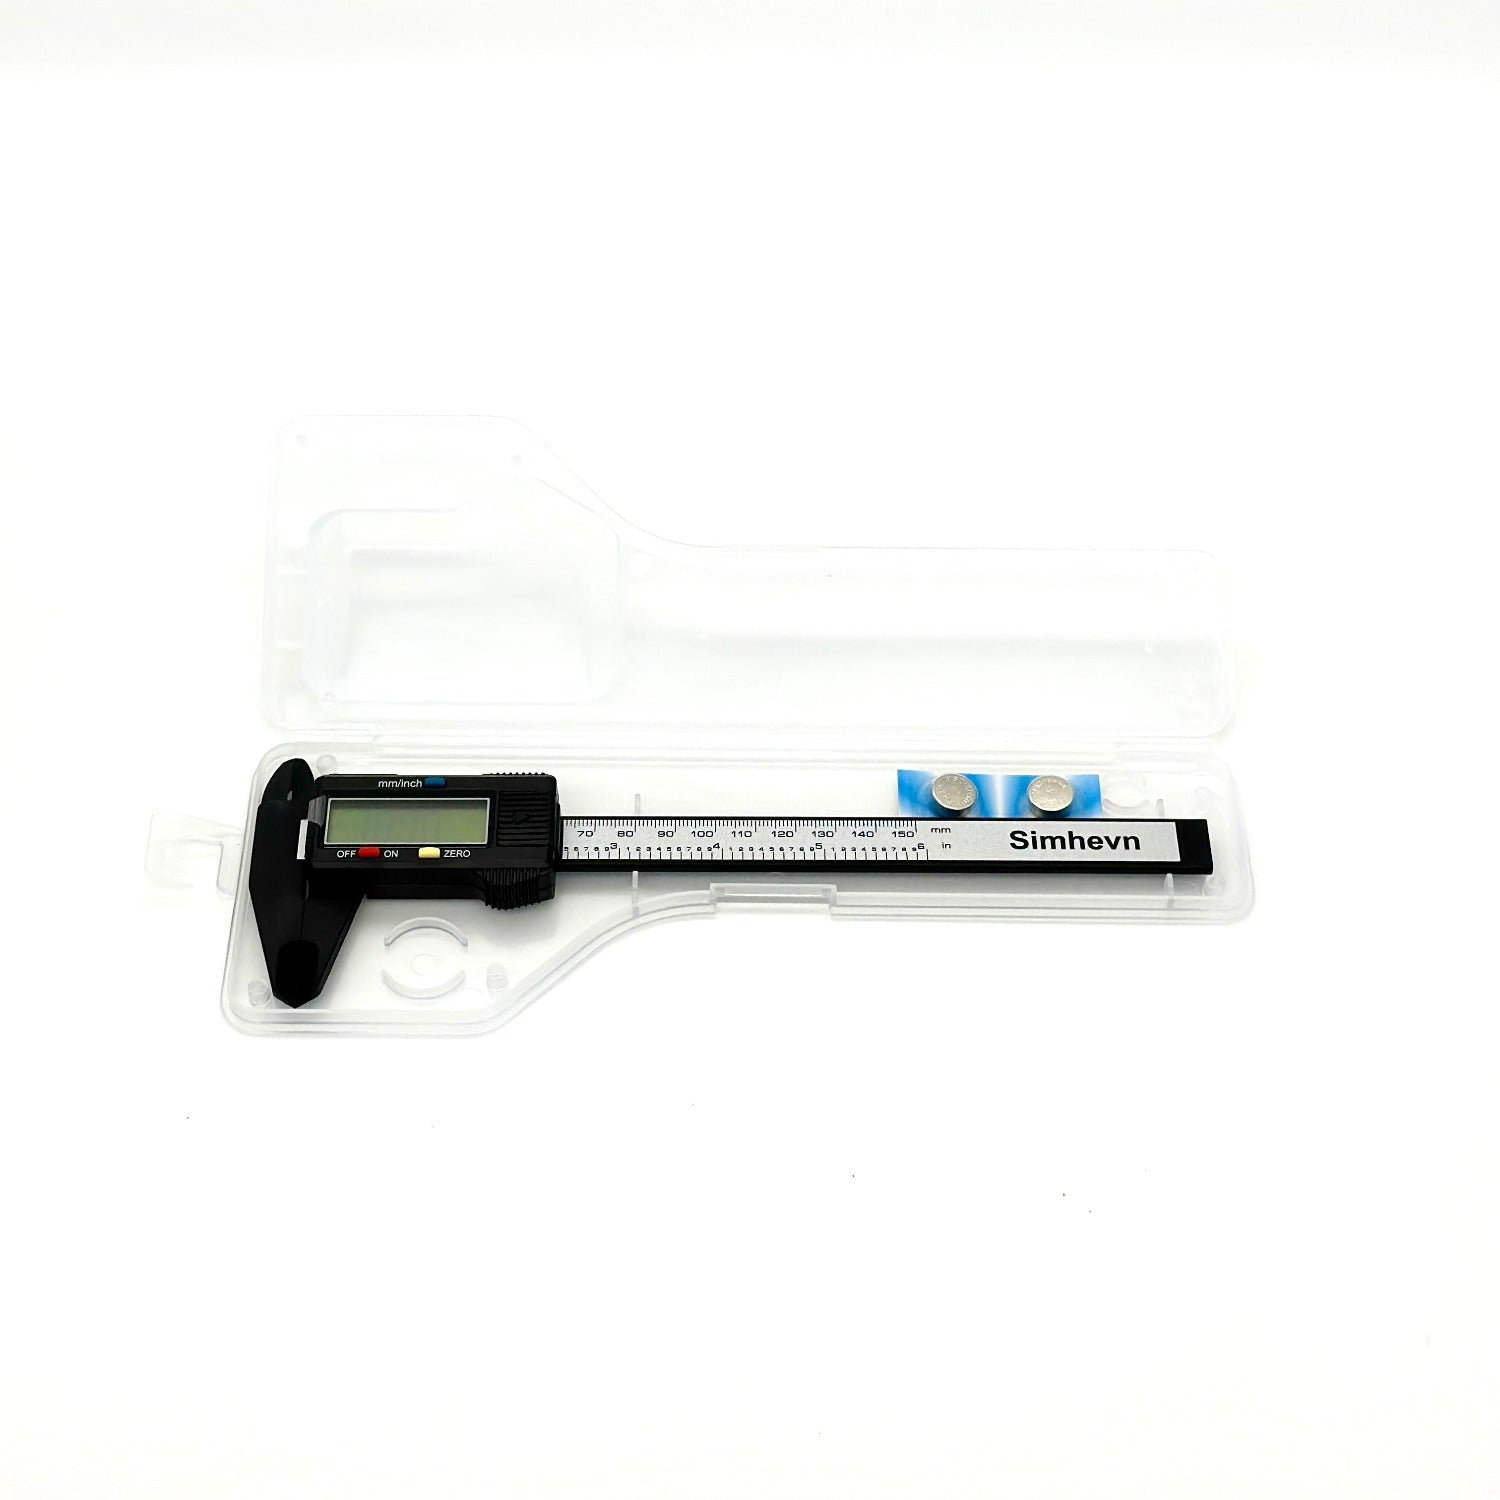 Electronic Digital Caliper- Accurately Measure Hardware & Parts!